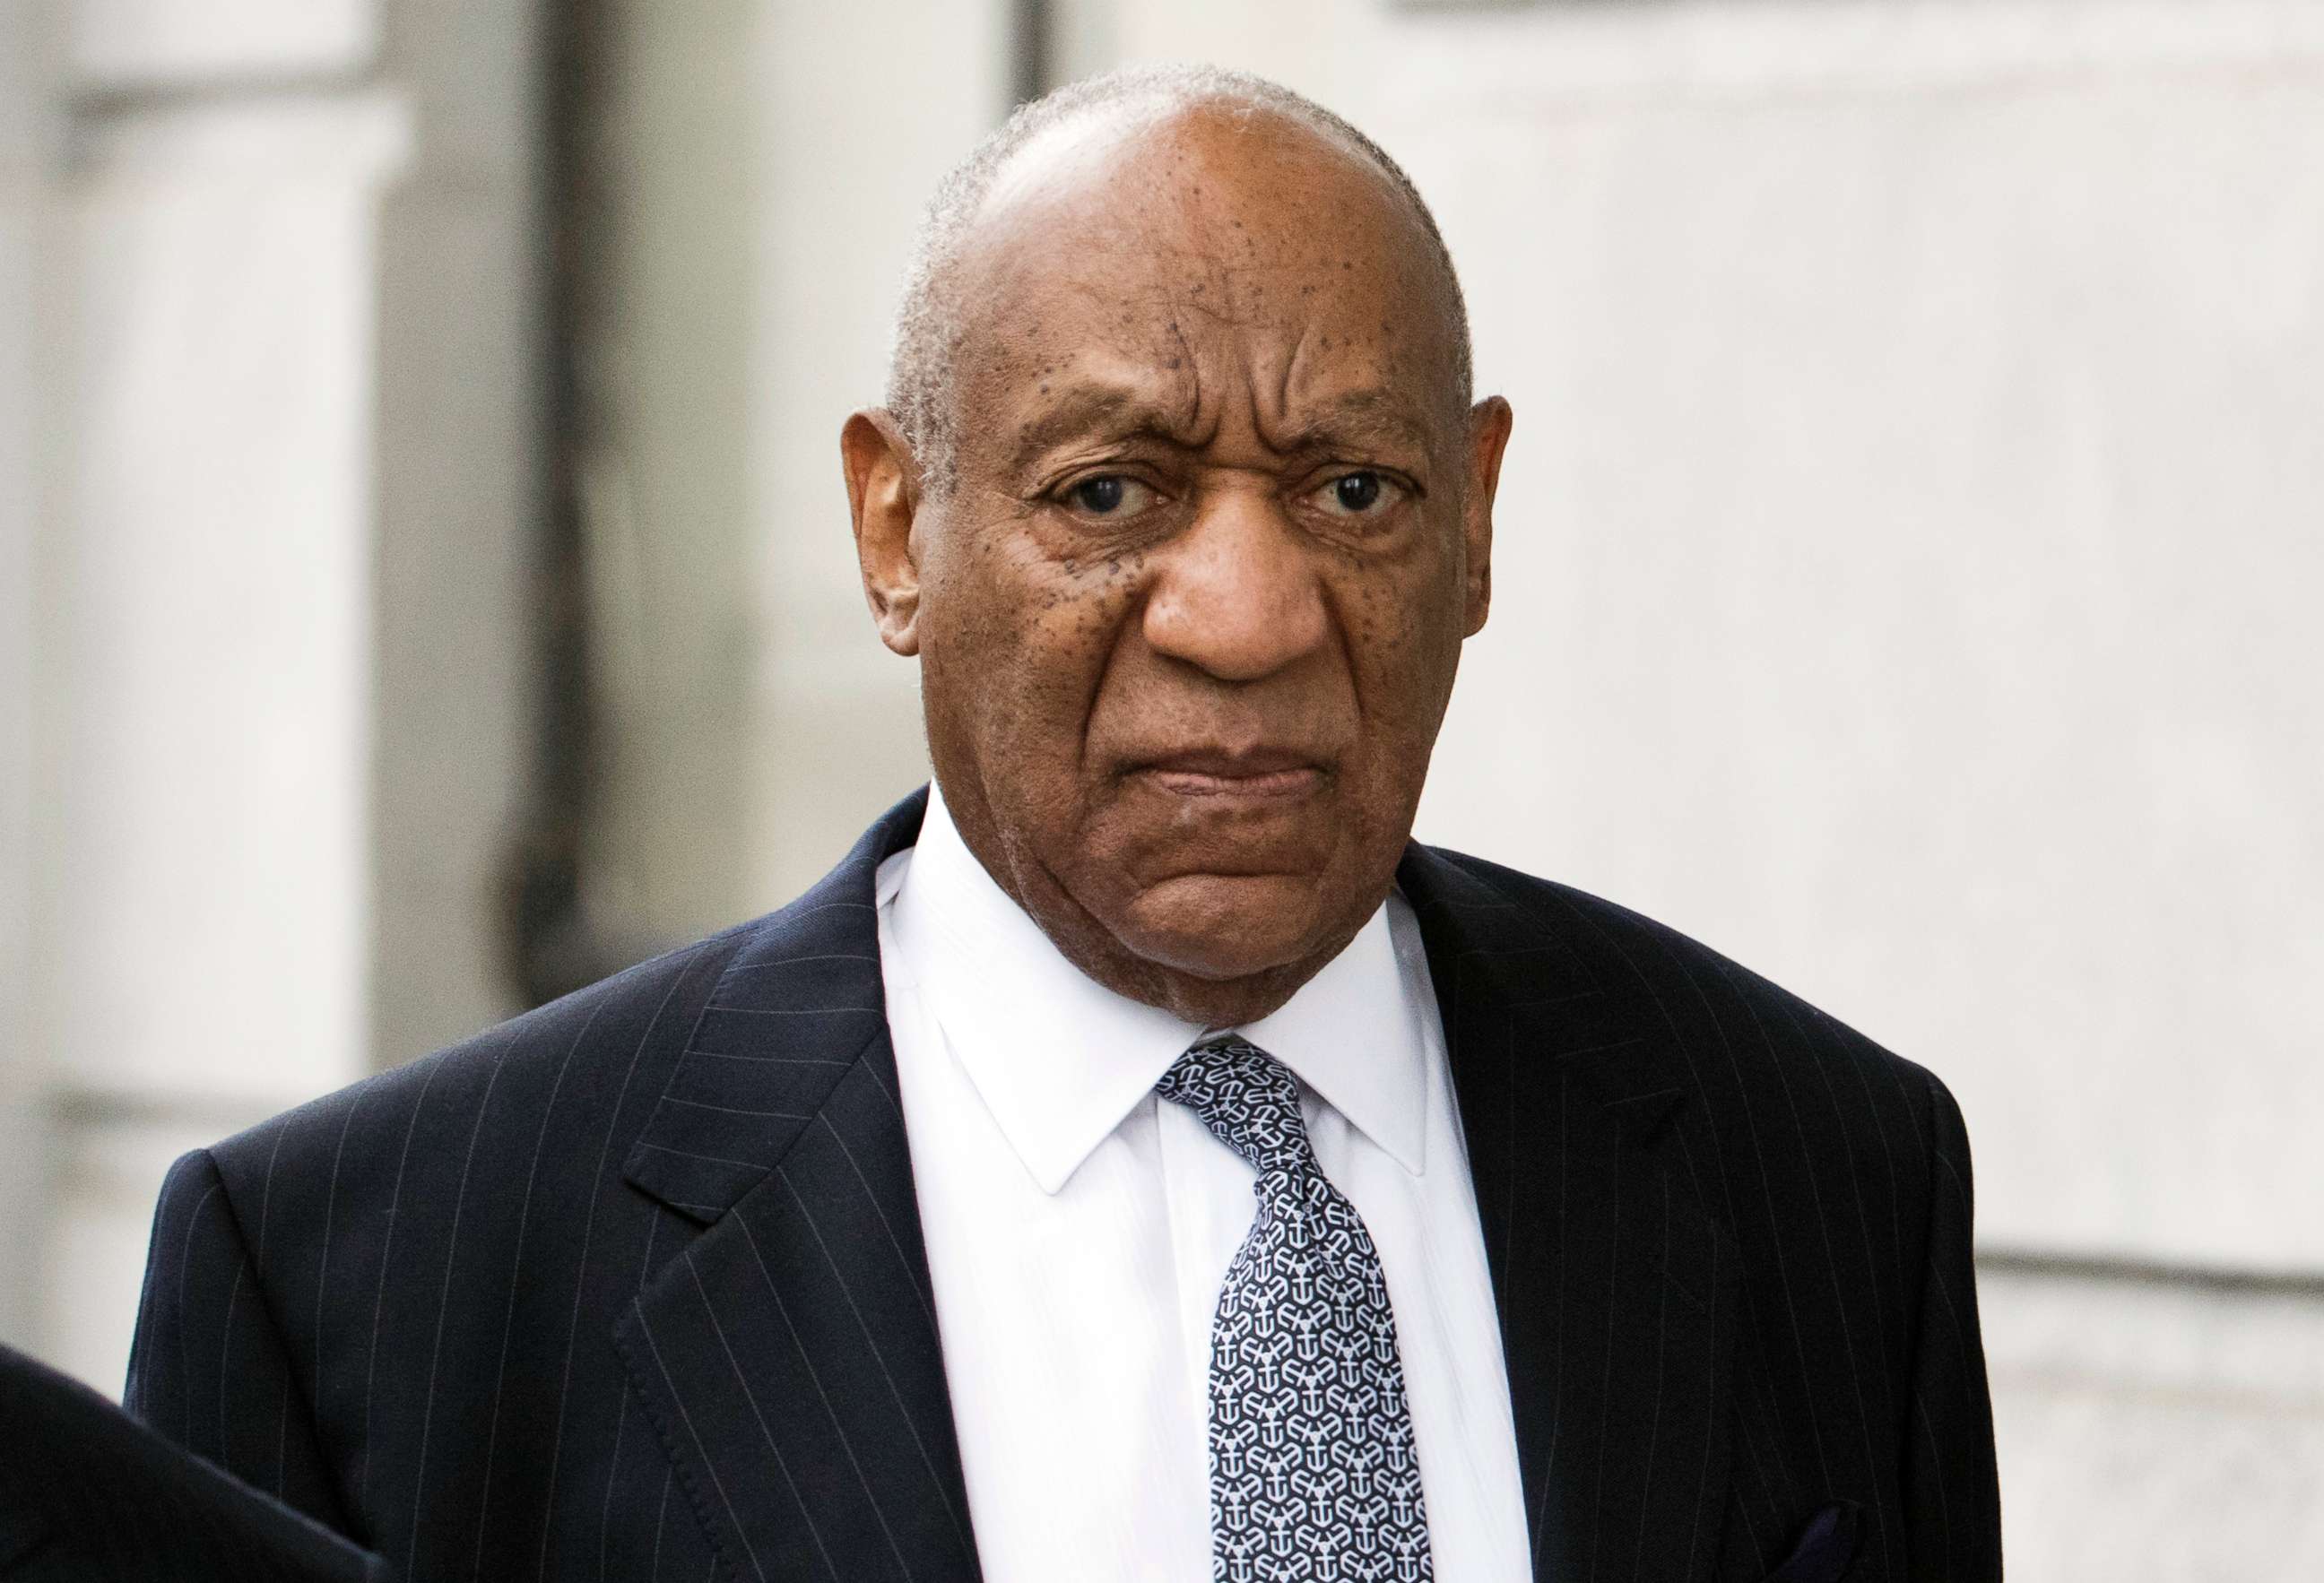 PHOTO: Bill Cosby arrives for his sexual assault case at the Montgomery County Courthouse, April 4, 2018, in Norristown, PA.